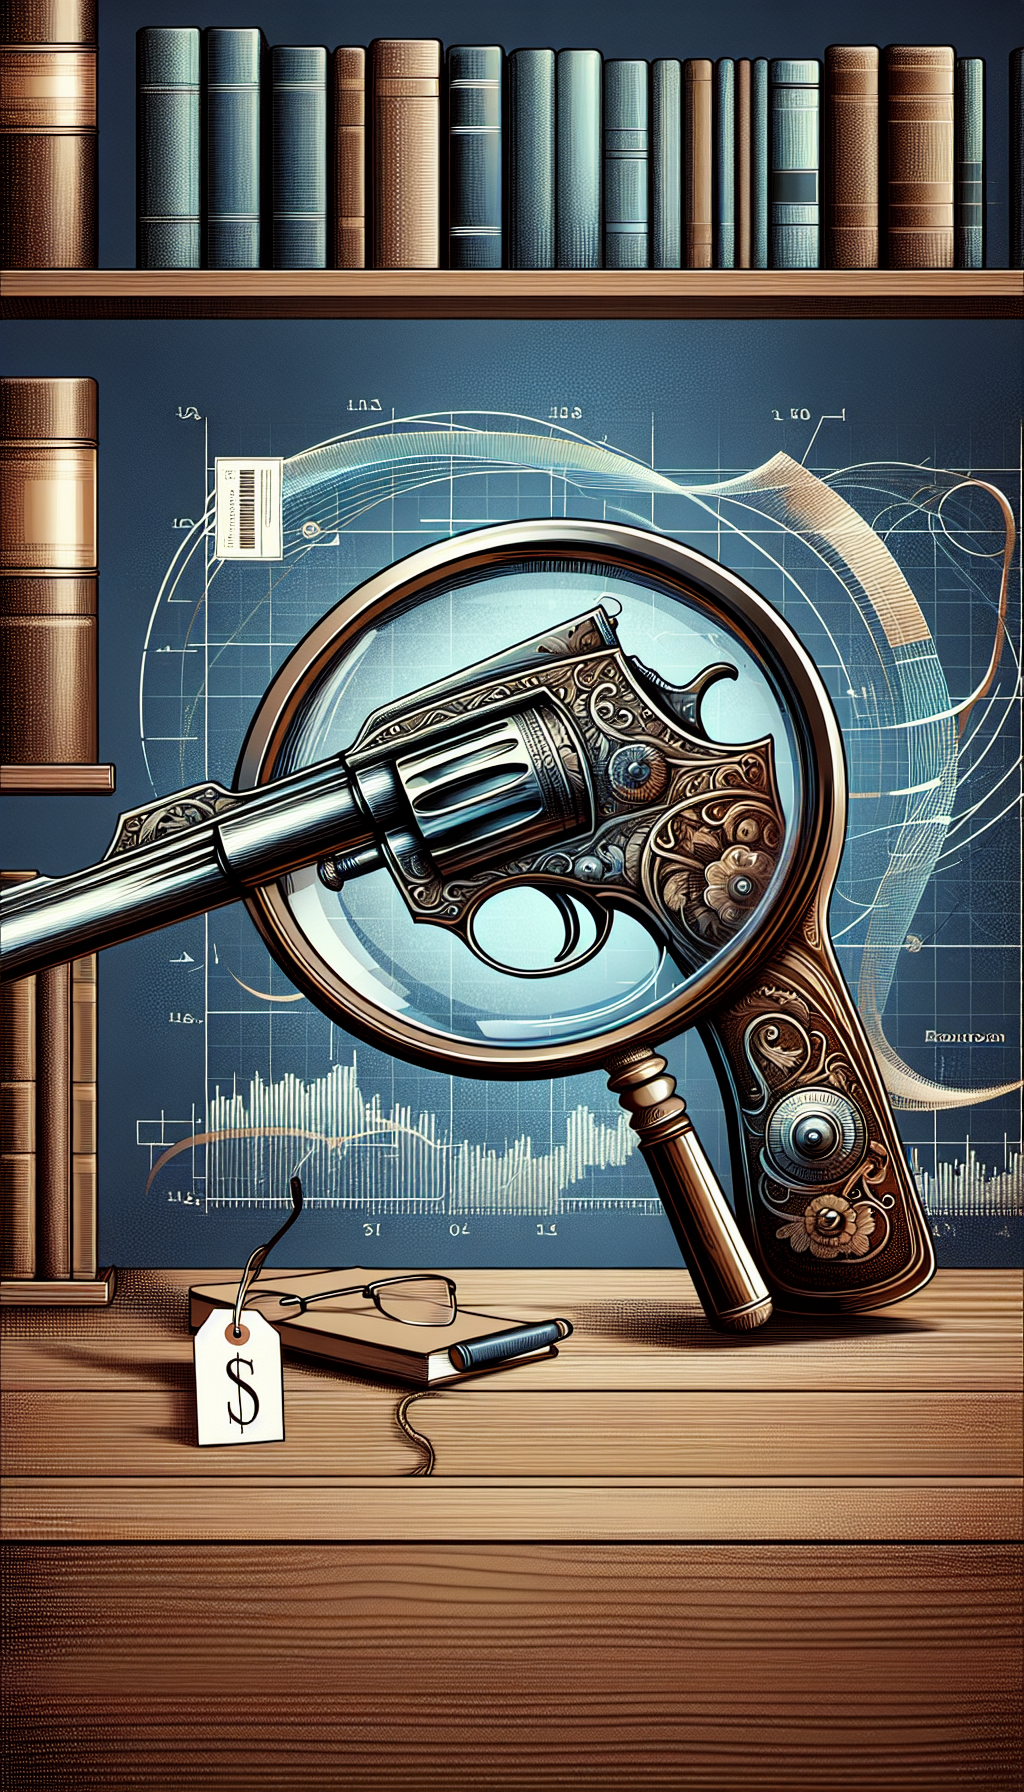 An illustration showcasing a magnifying glass focused on the intricate details of an ornate antique gun, with a pricing tag attached, and in the background, a shelf with books labeled 'Appraisal Tips' and 'Collector's Guide'. The gun's surface reflects data charts representing fluctuating market values, and the magnifying glass signifies the precision needed in appraisal.